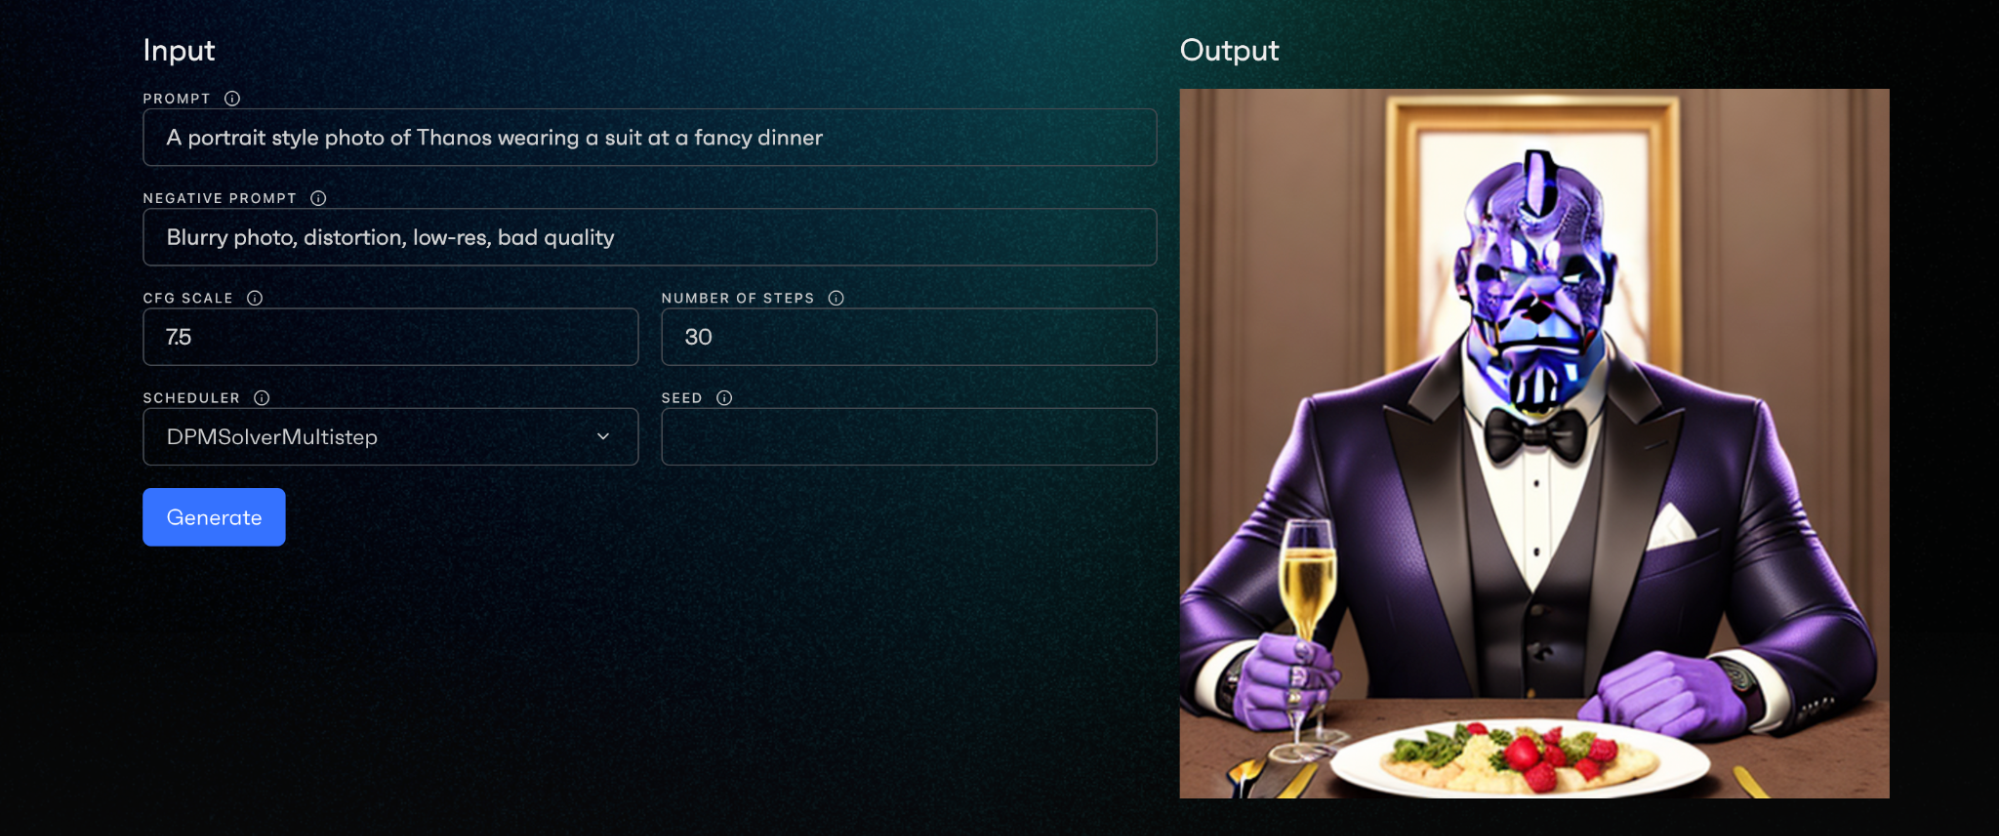 octoAI compute service stable diffusion template showing and image for prompt "A portrait style photo of Thanos wearing a suit at a fancy dinner" || '